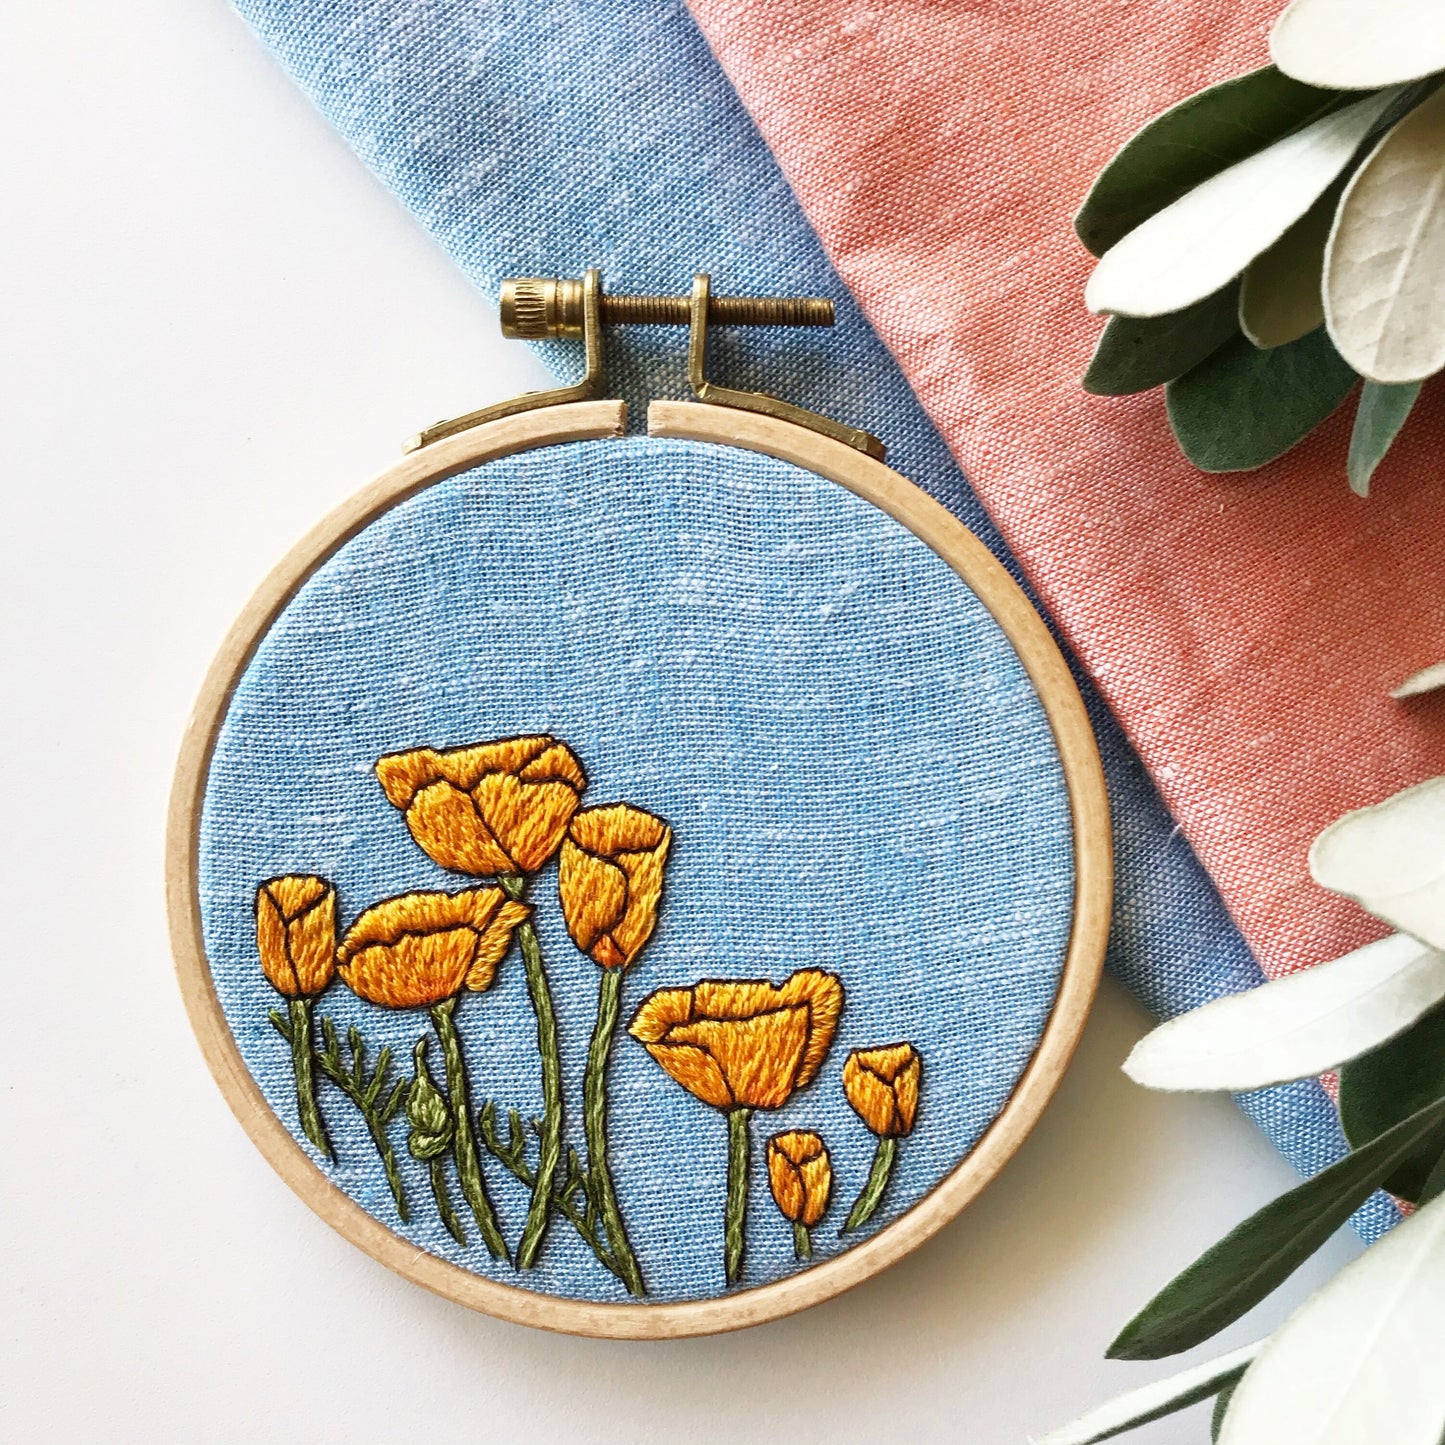 Peaceful Poppies: Intermediate Embroidery Kit